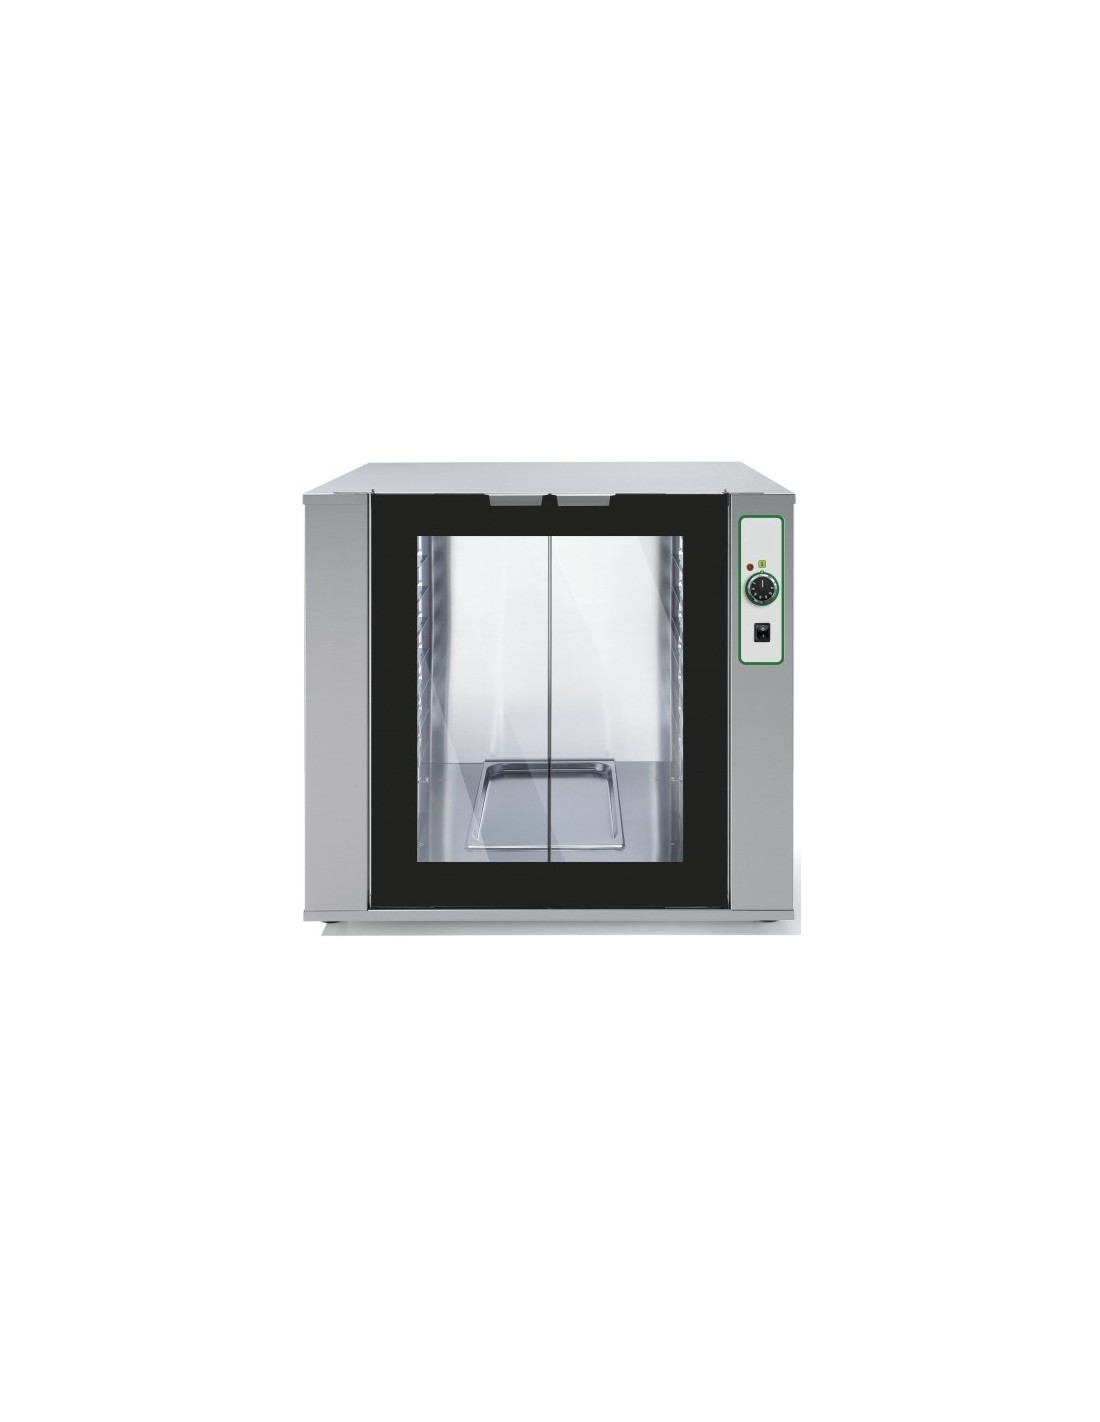 Prover cabinet - Mod. ALTOP64 - Stainless steel structure and glass door - Thermostat 0-60 &176 C - Capacity n. 8 trays 60 x 40